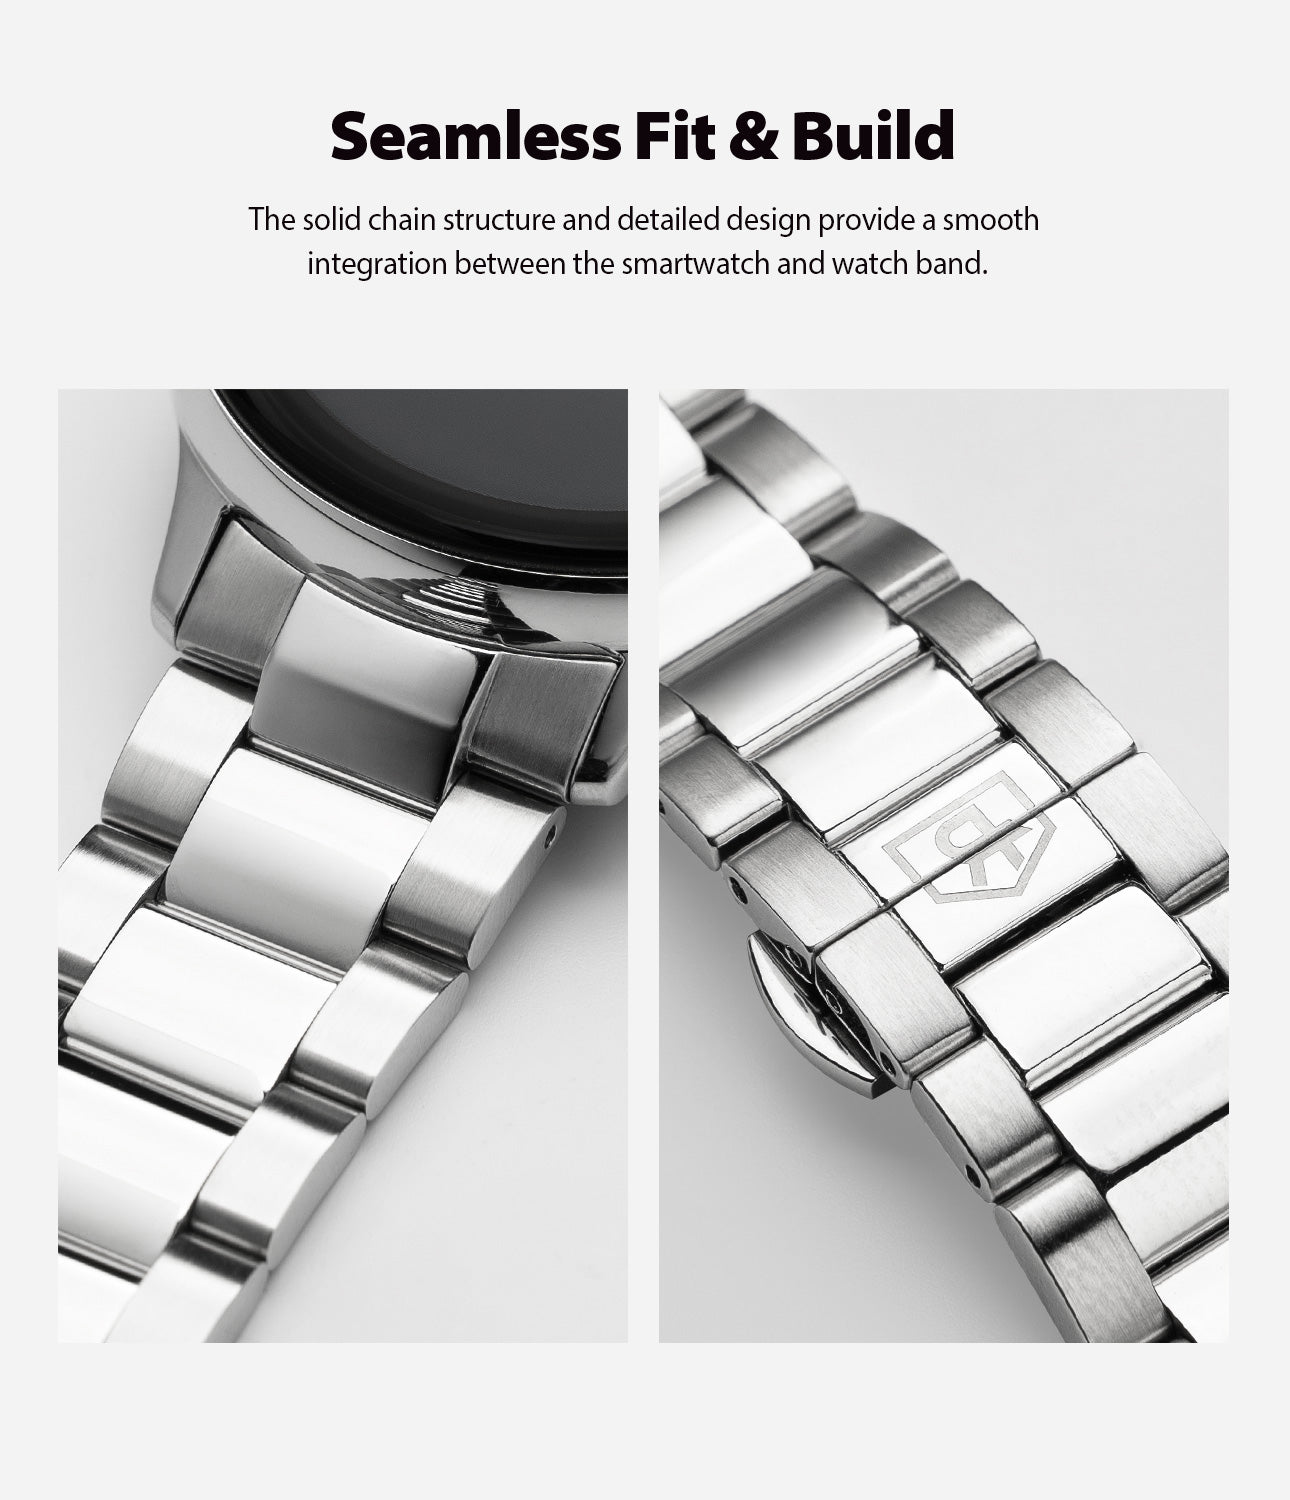 seamless fit and build with solid chain structure